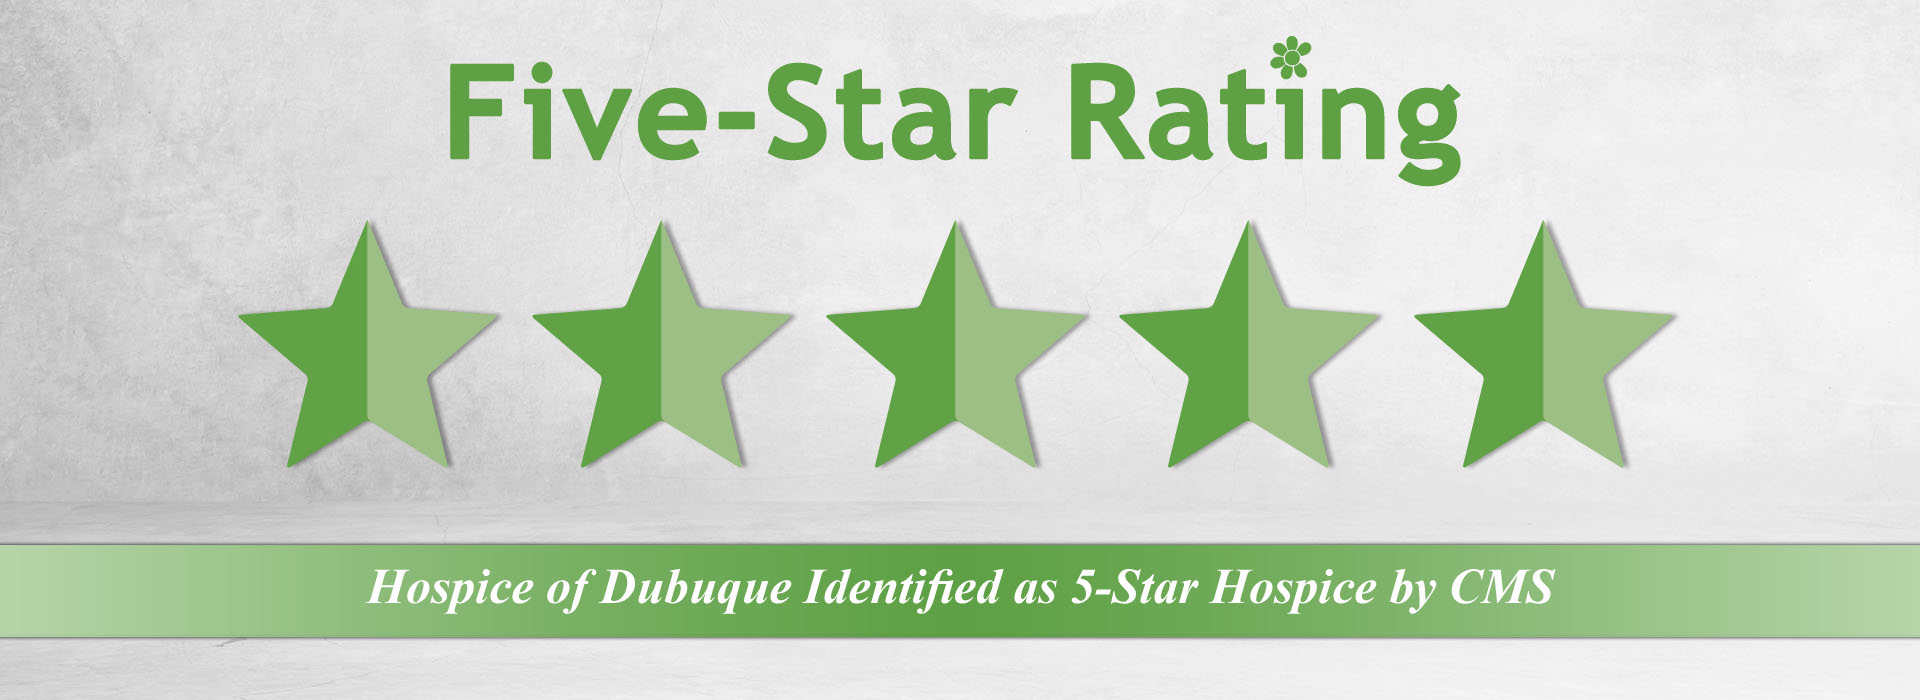 Hospice of Dubuque Identified as 5-Star Hospice by CMS